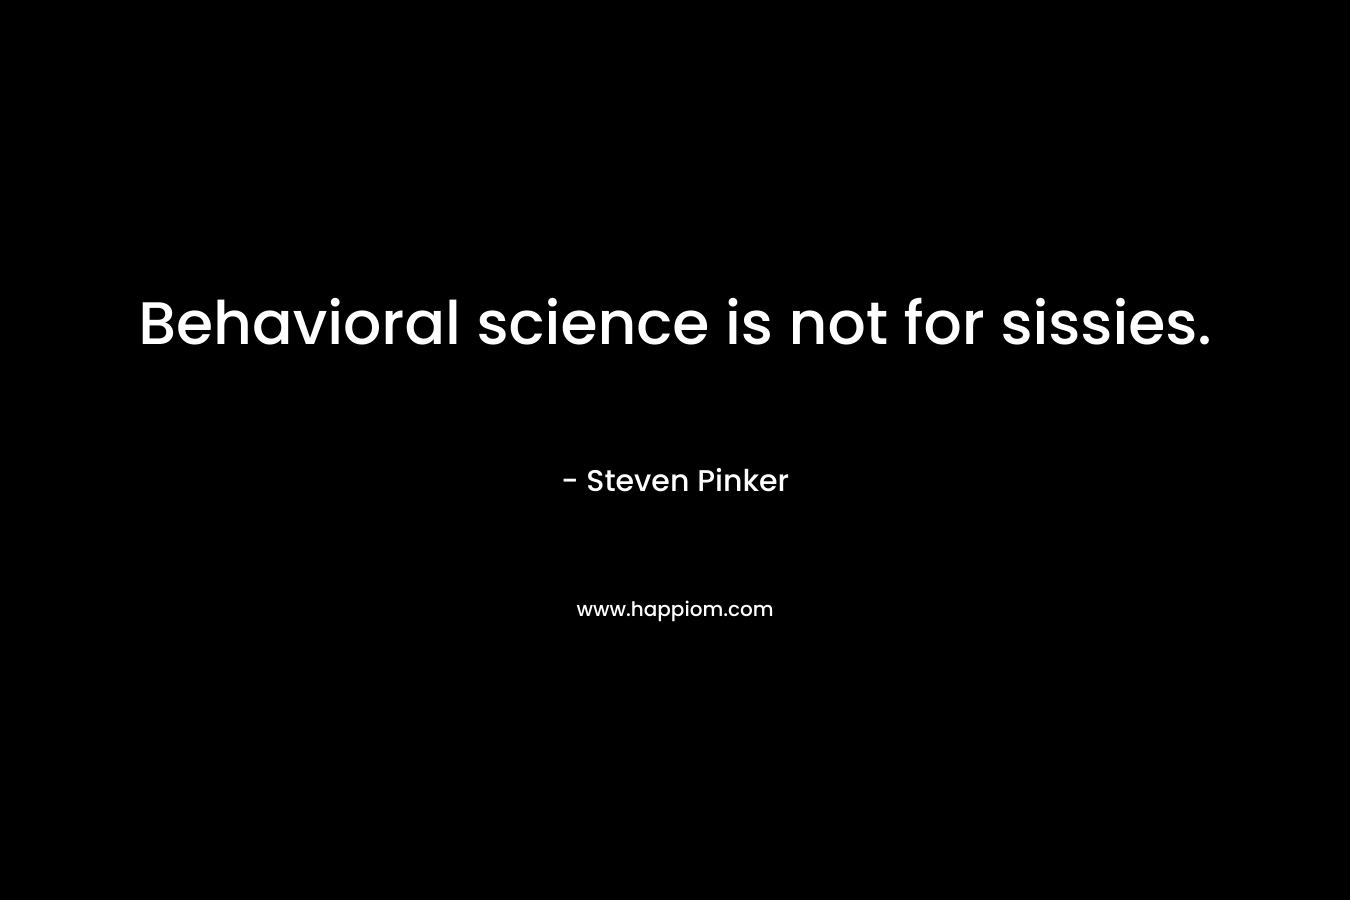 Behavioral science is not for sissies.